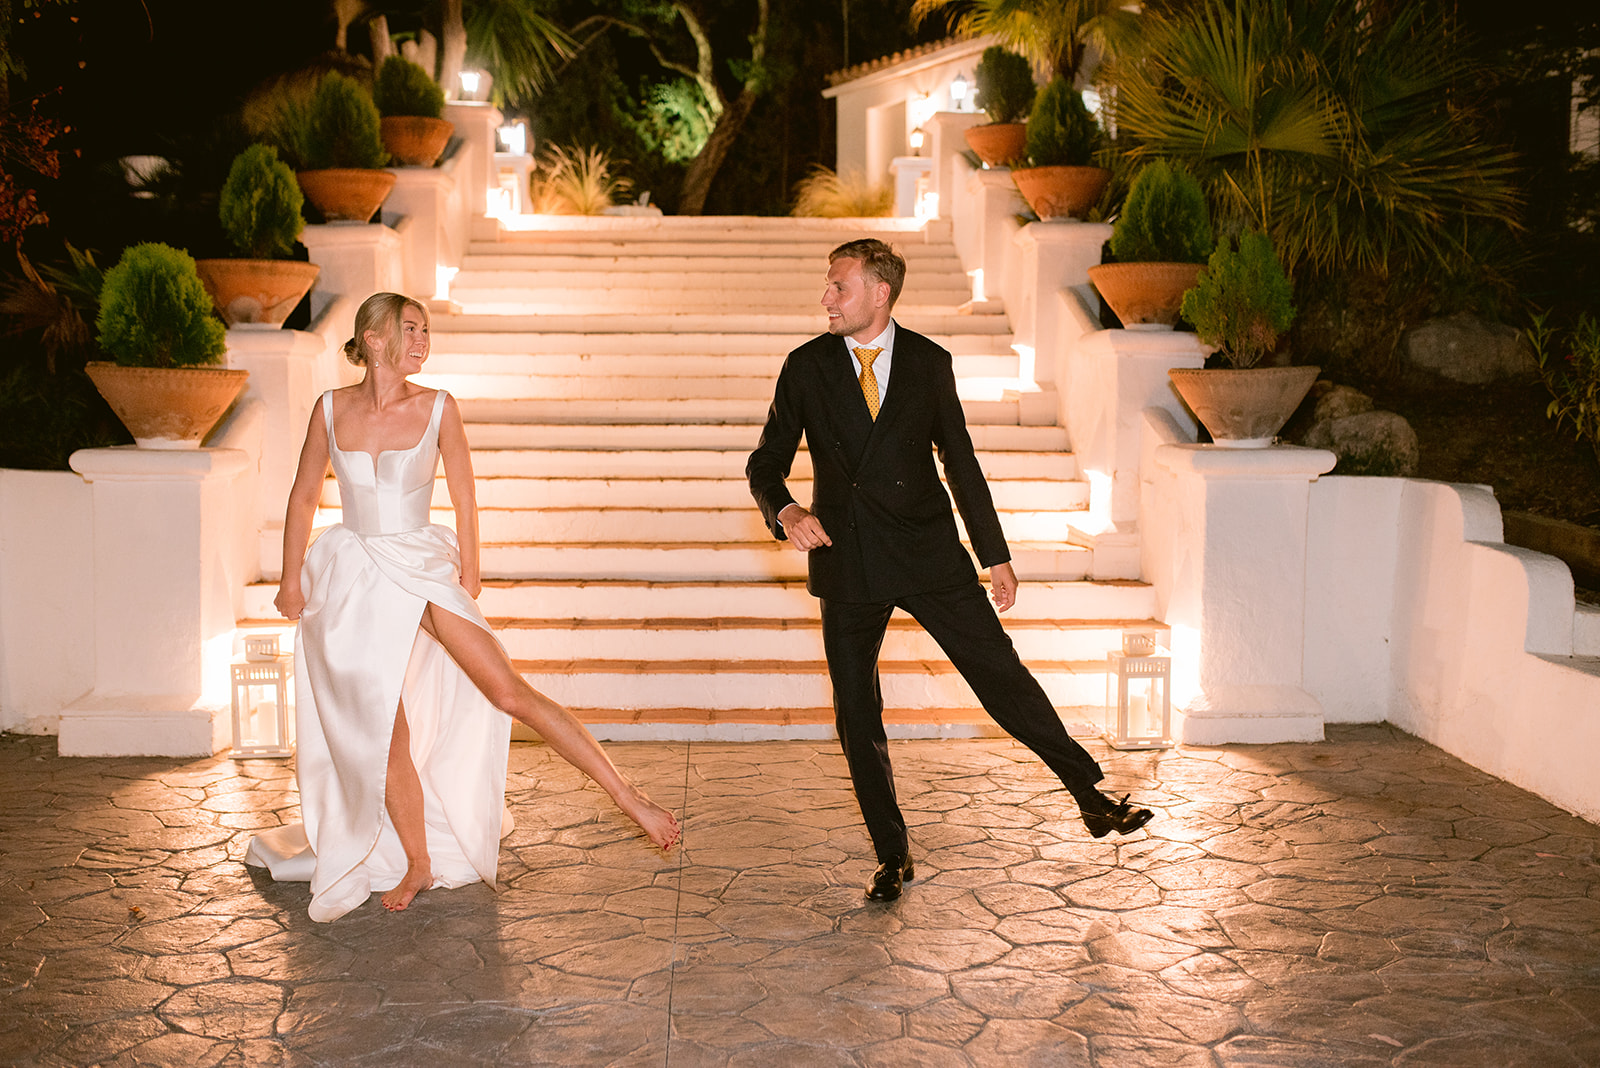 Your Dream Wedding Playlist guide - set the tone!